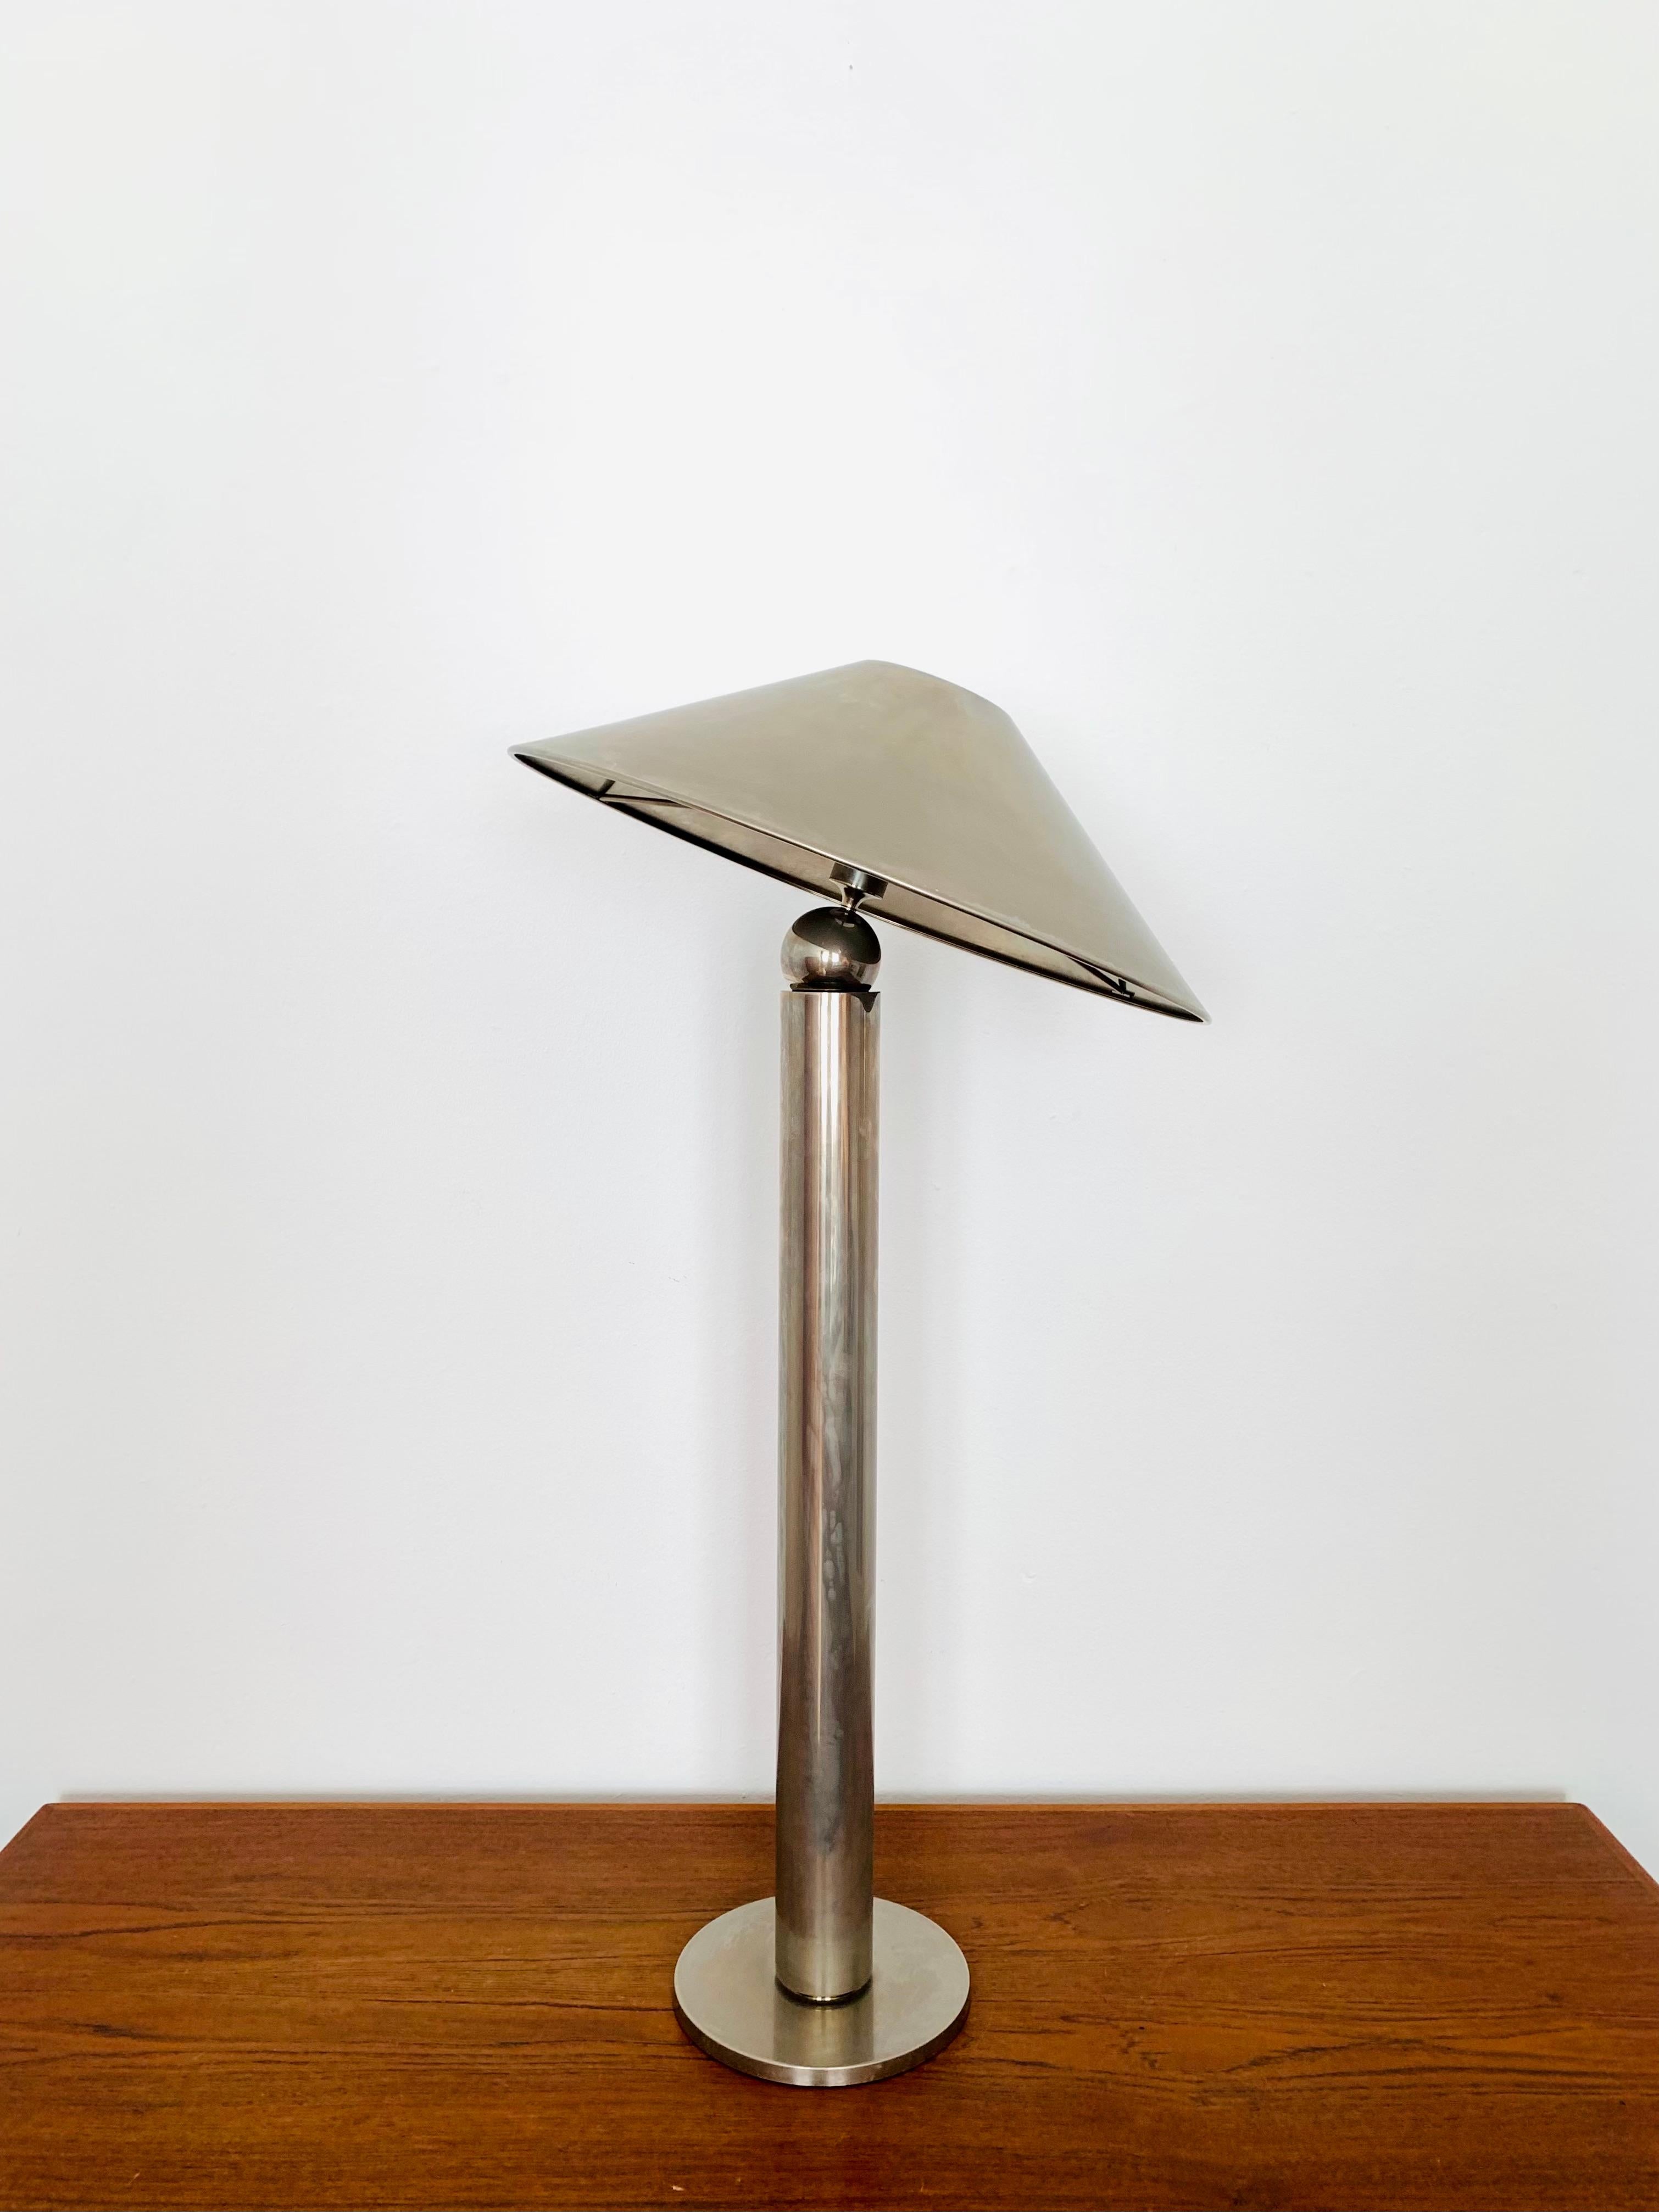 Late 20th Century Nickel Plated Floor Lamp by Florian Schulz For Sale